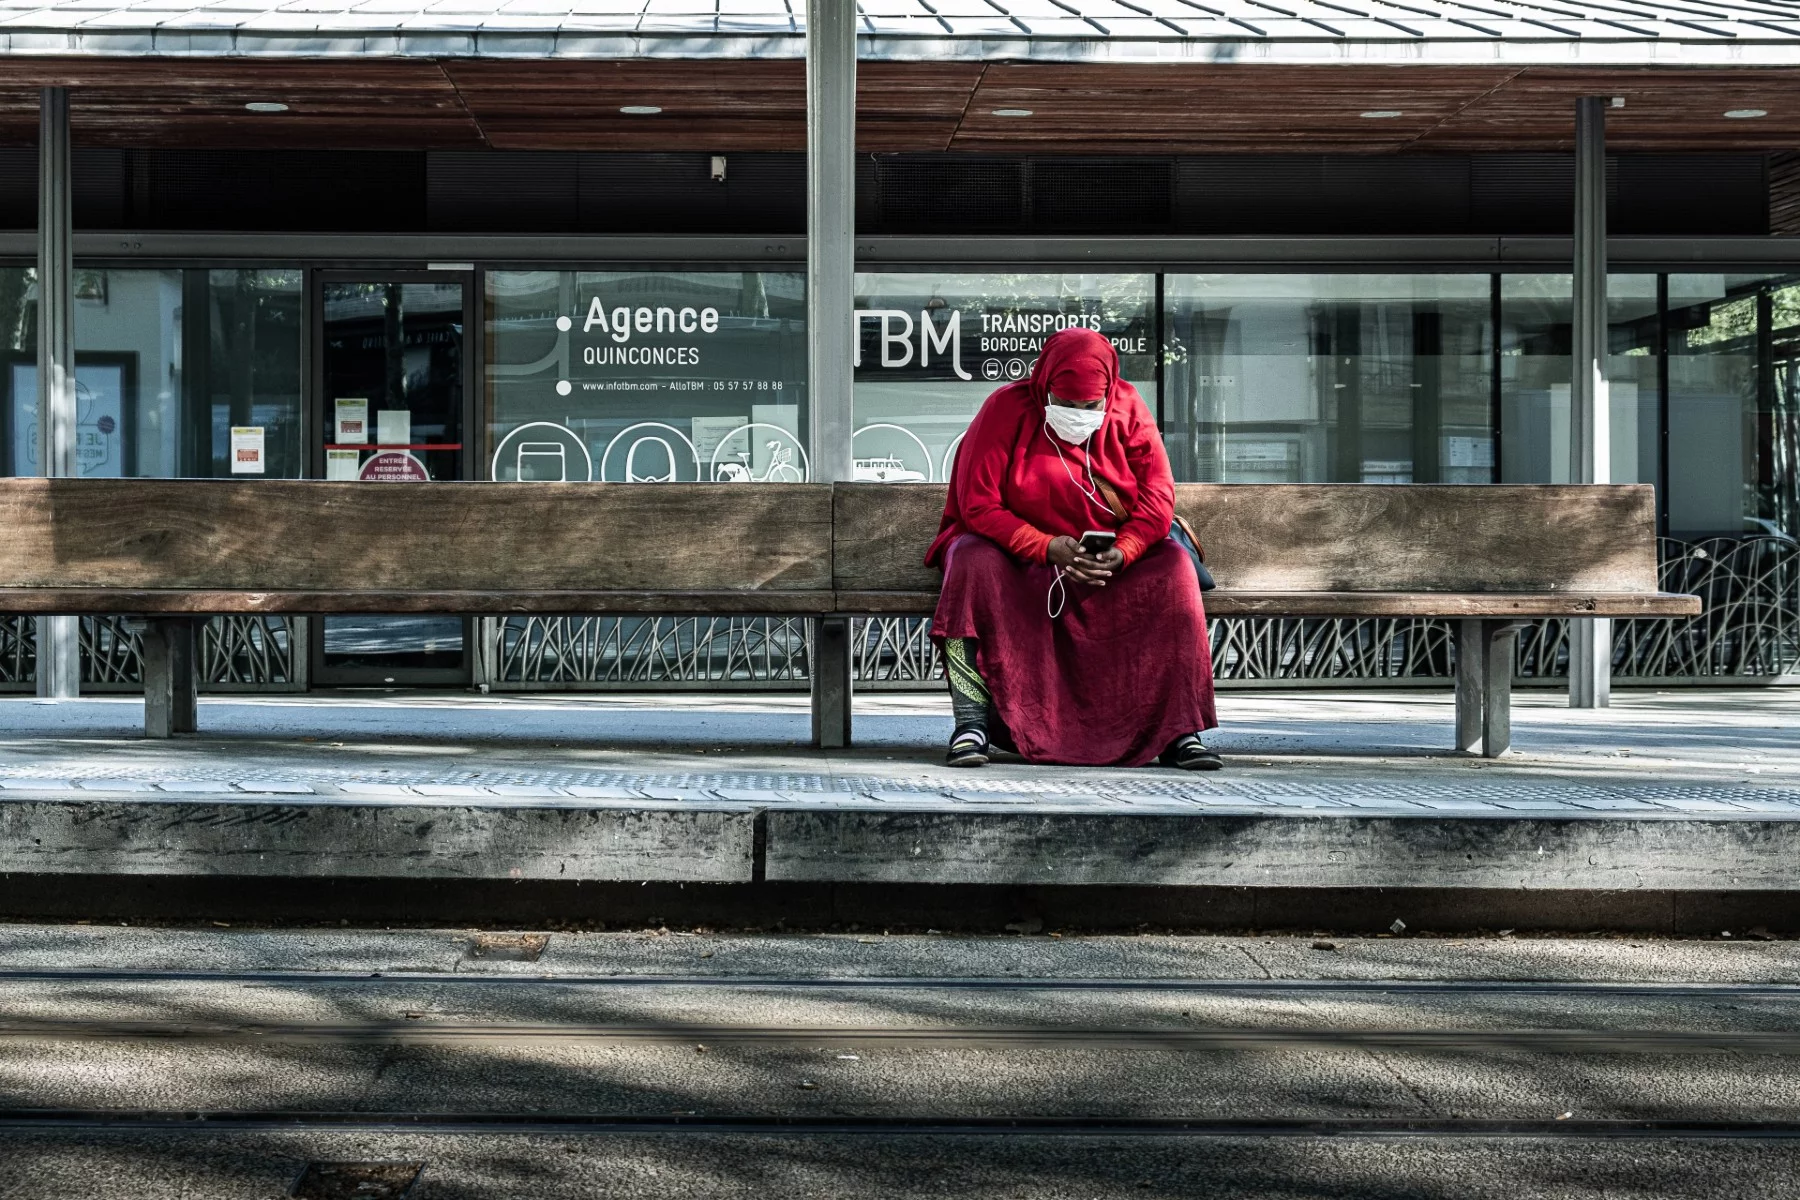 A lady in a red burqa, listening to music on her phone as she waits on public transport. 